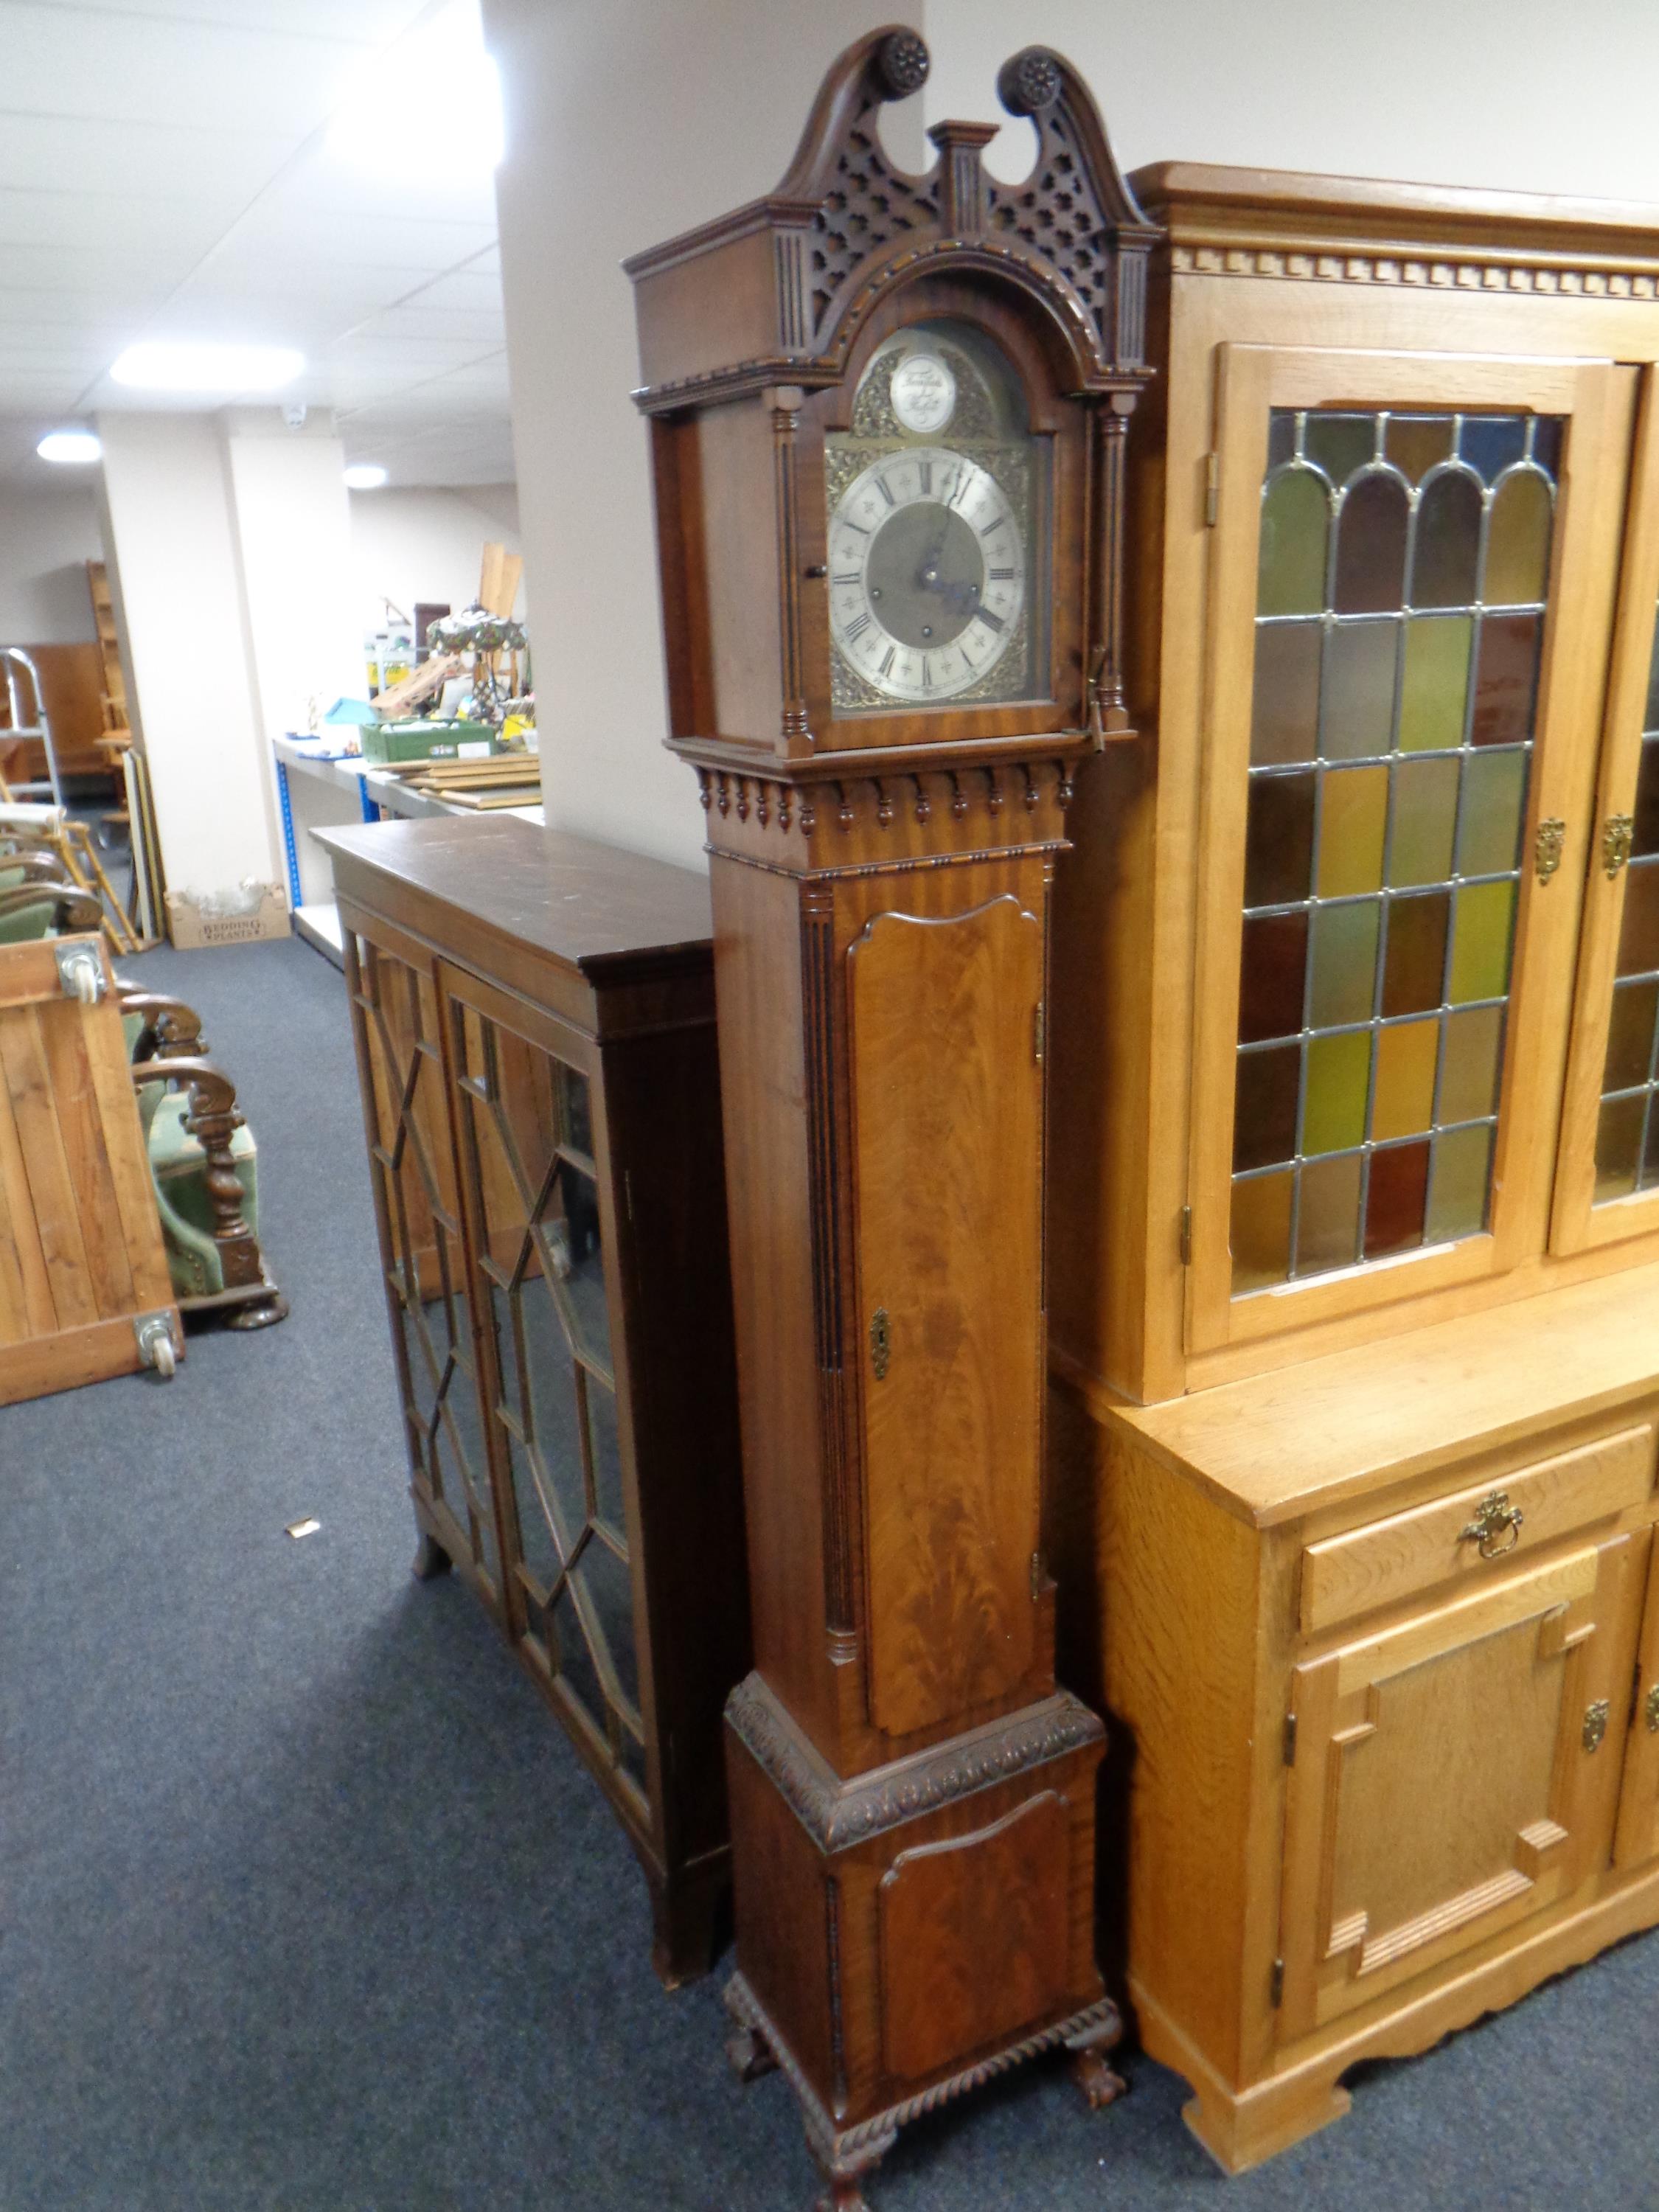 A Hamilton and Inches Tempus Fugit grandmother clock with key and weight